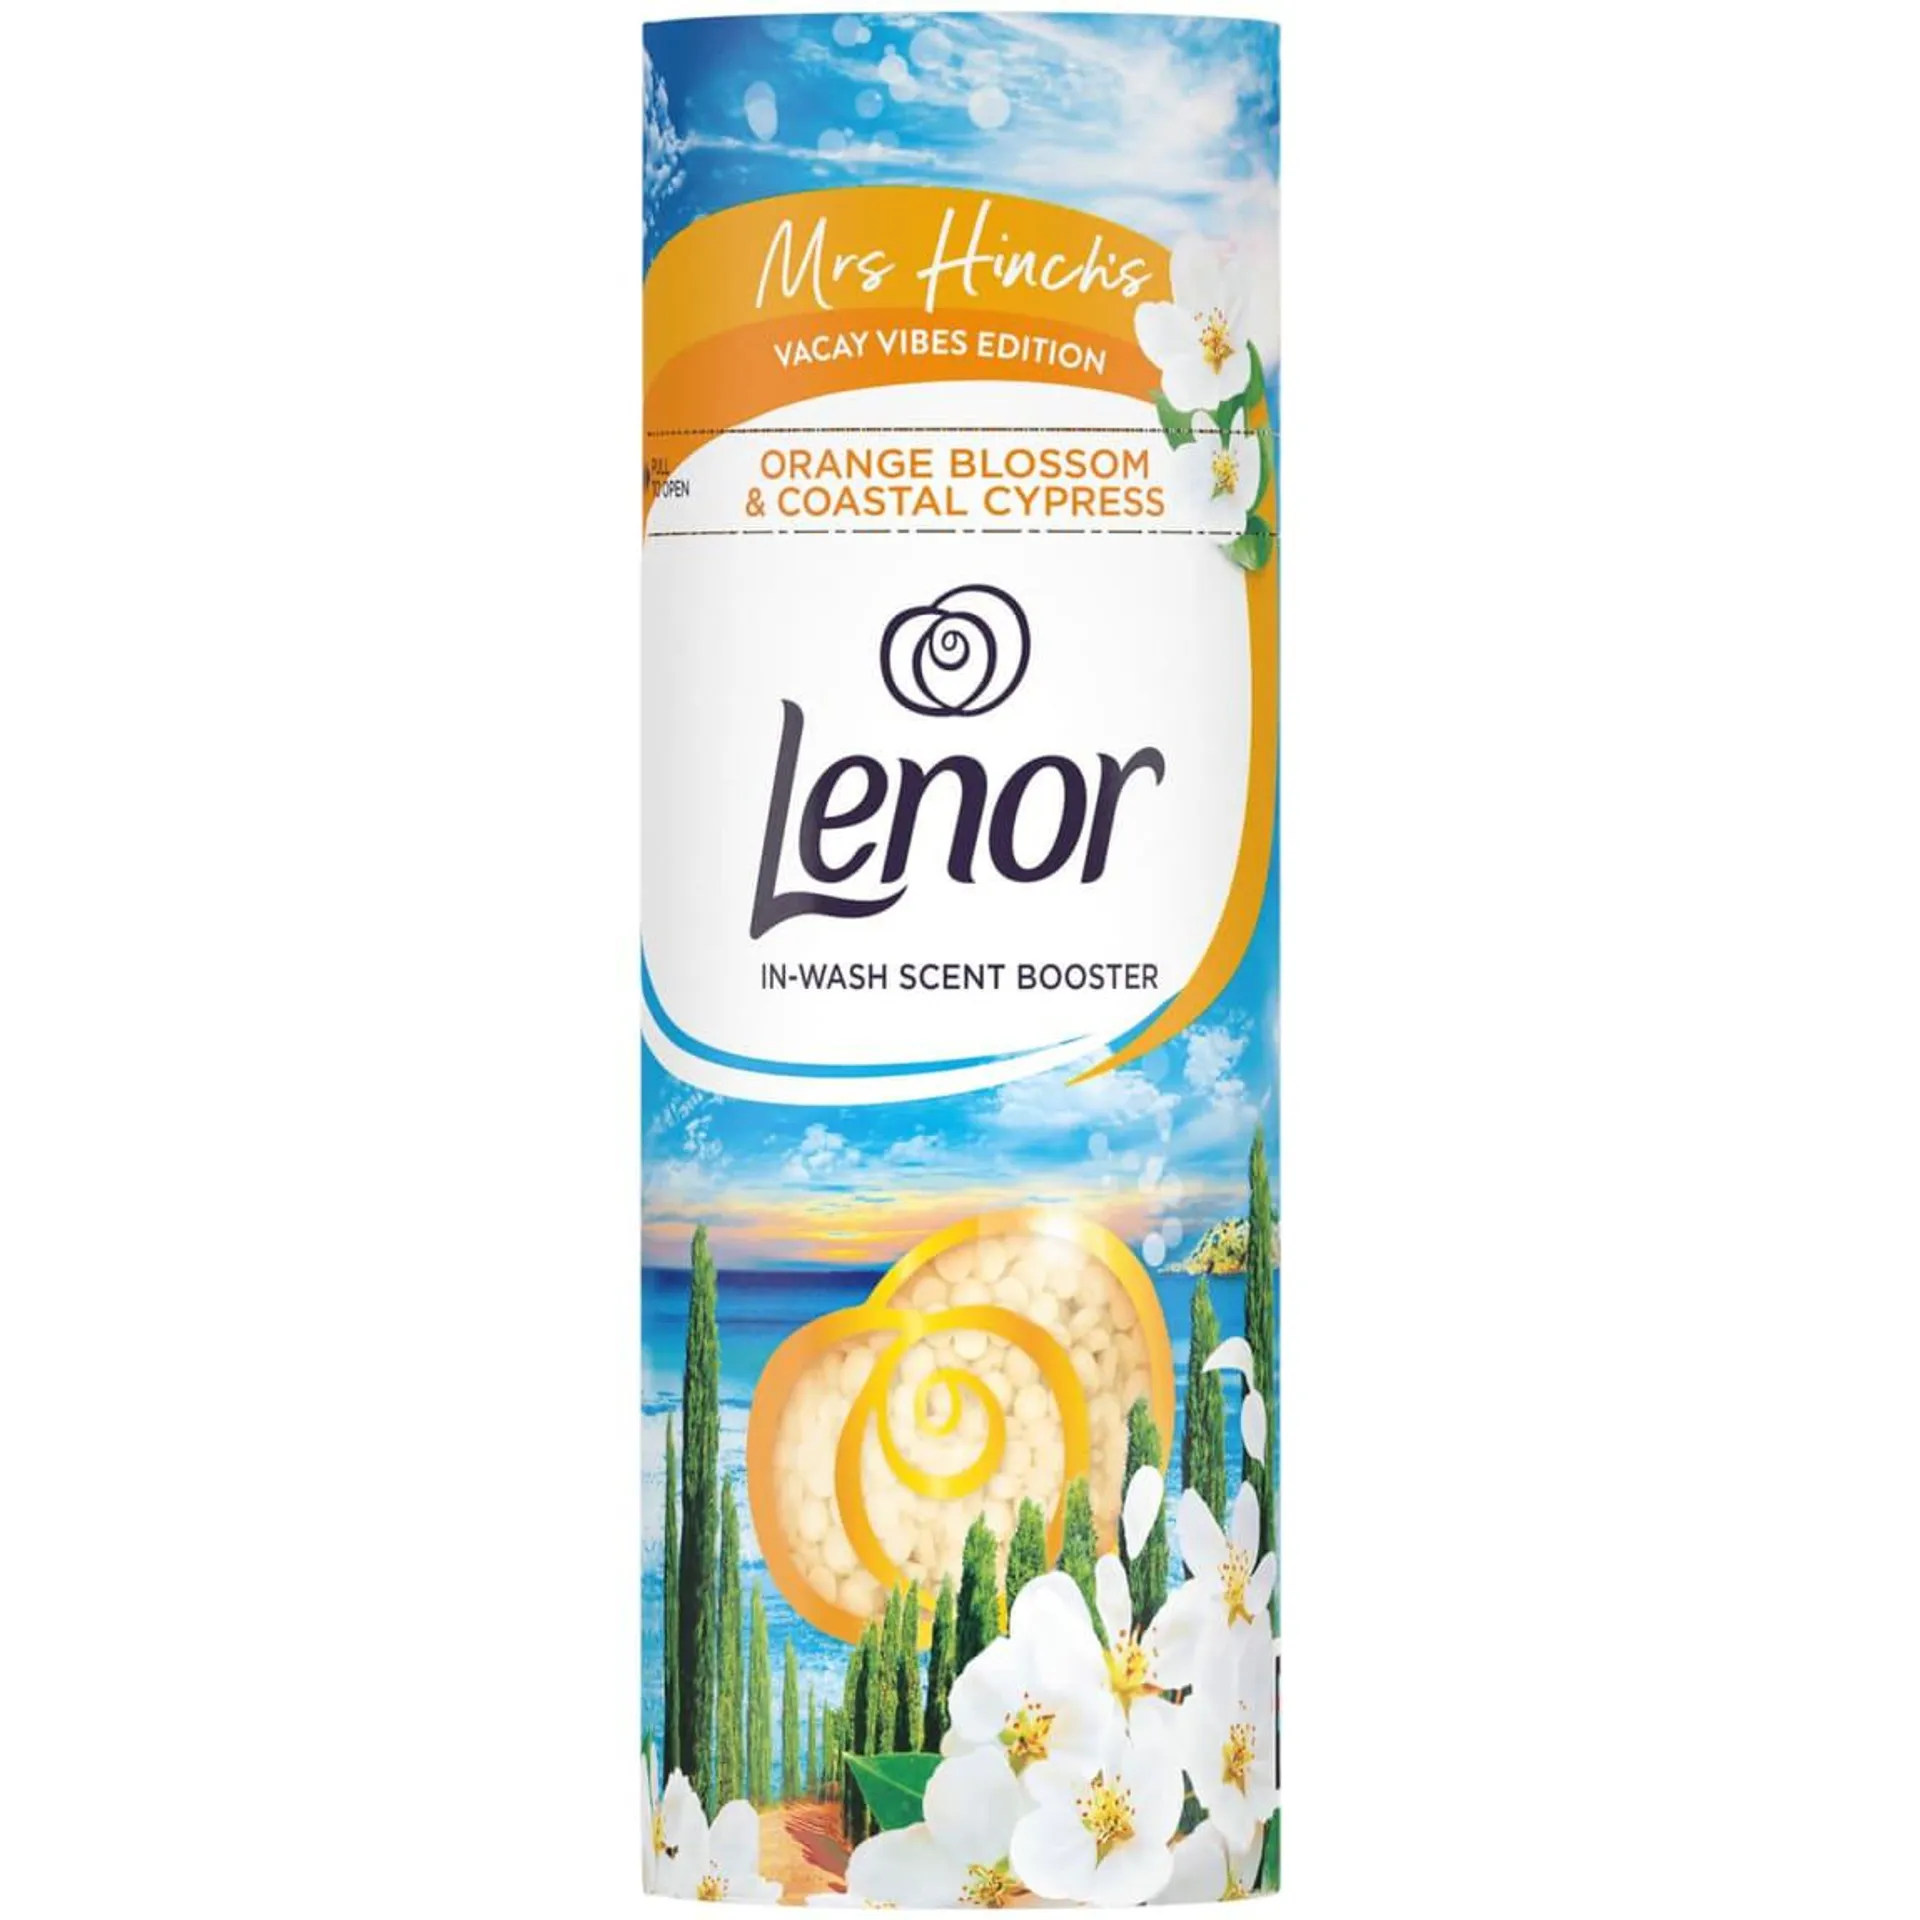 Mrs Hinch's Vacay Vibes Edition - Lenor In Wash Scent Booster 176g - Orange Blossom & Coastal Cypress